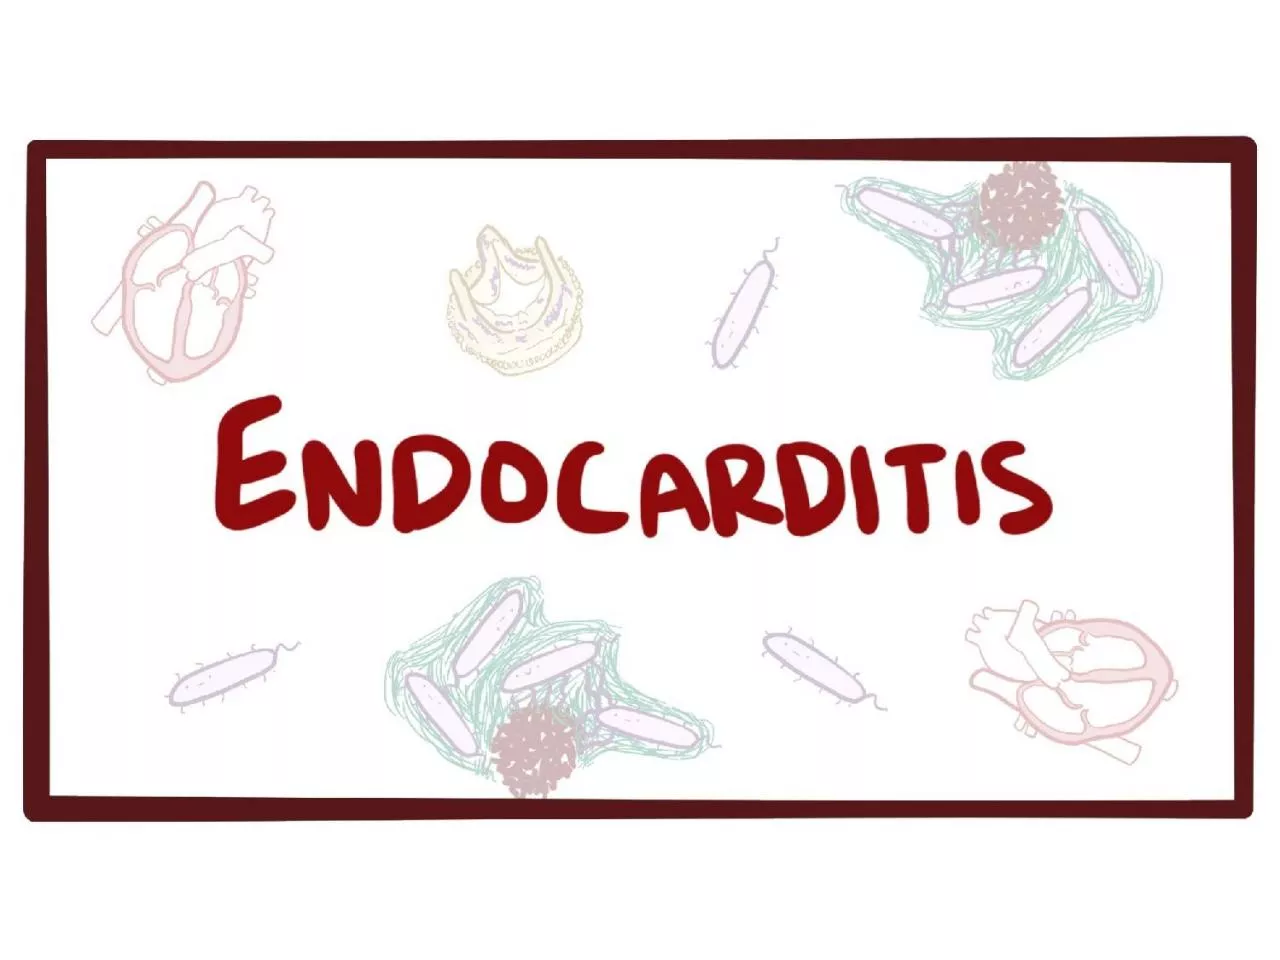 Endocarditis  is an inflammation of the